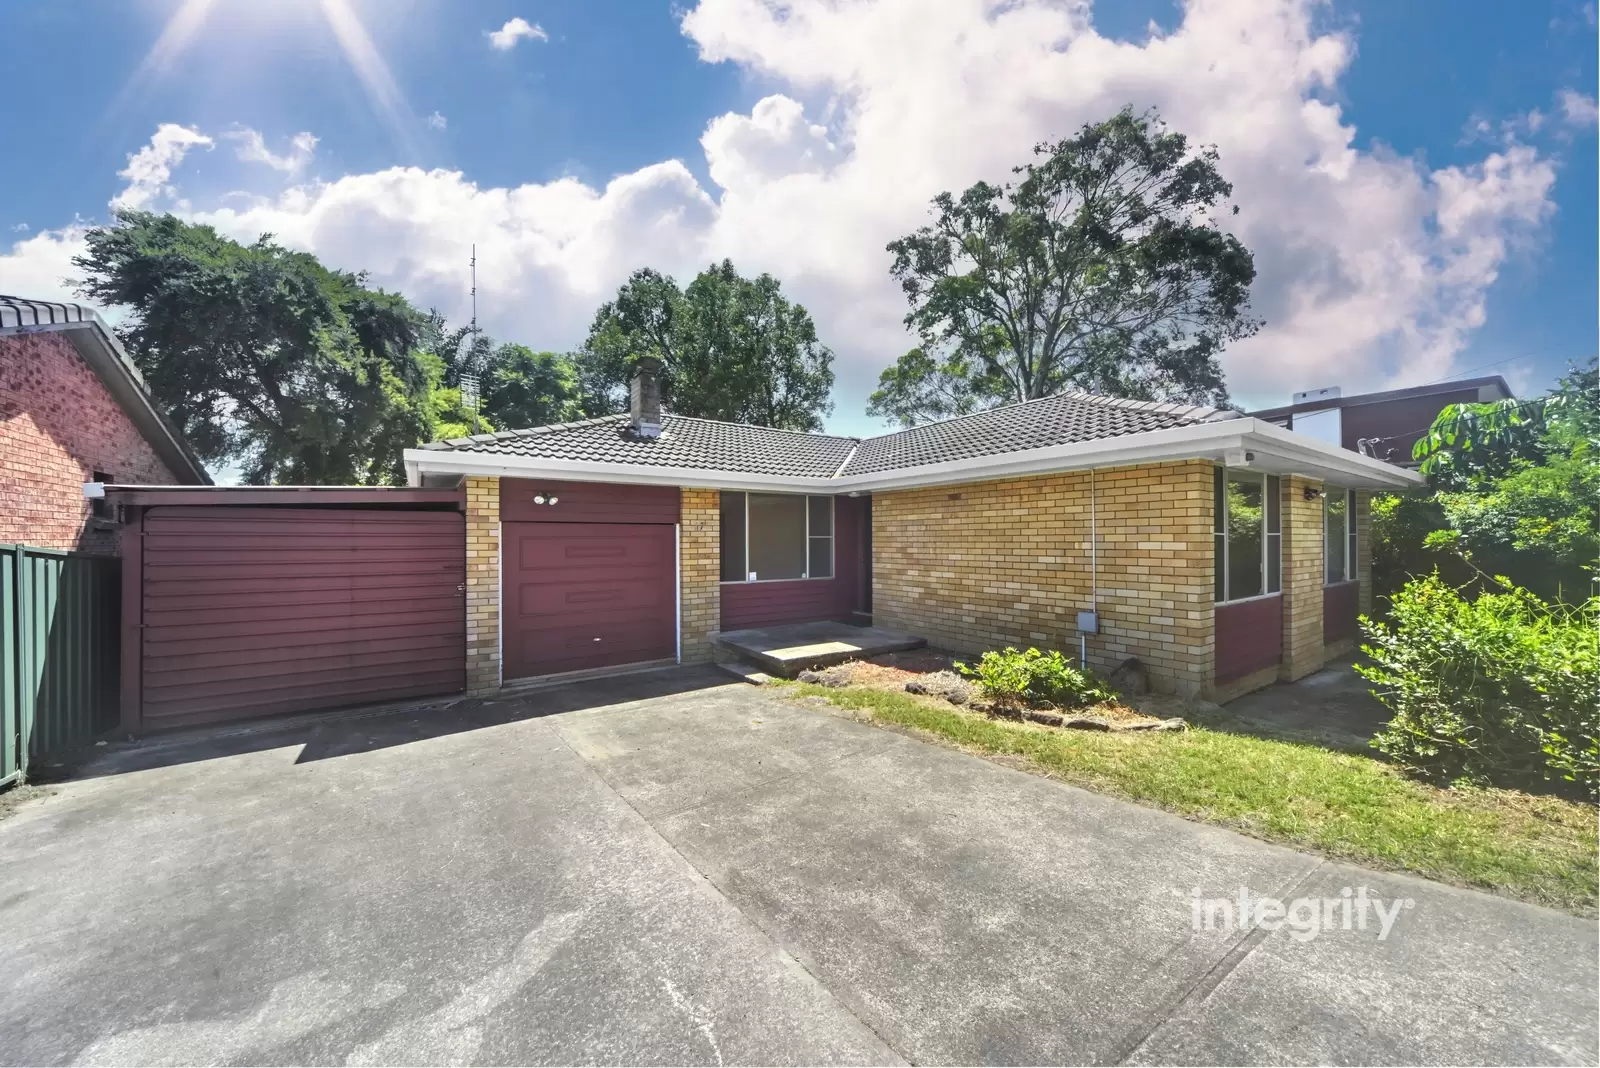 17 Elder Crescent, Nowra For Sale by Integrity Real Estate - image 1